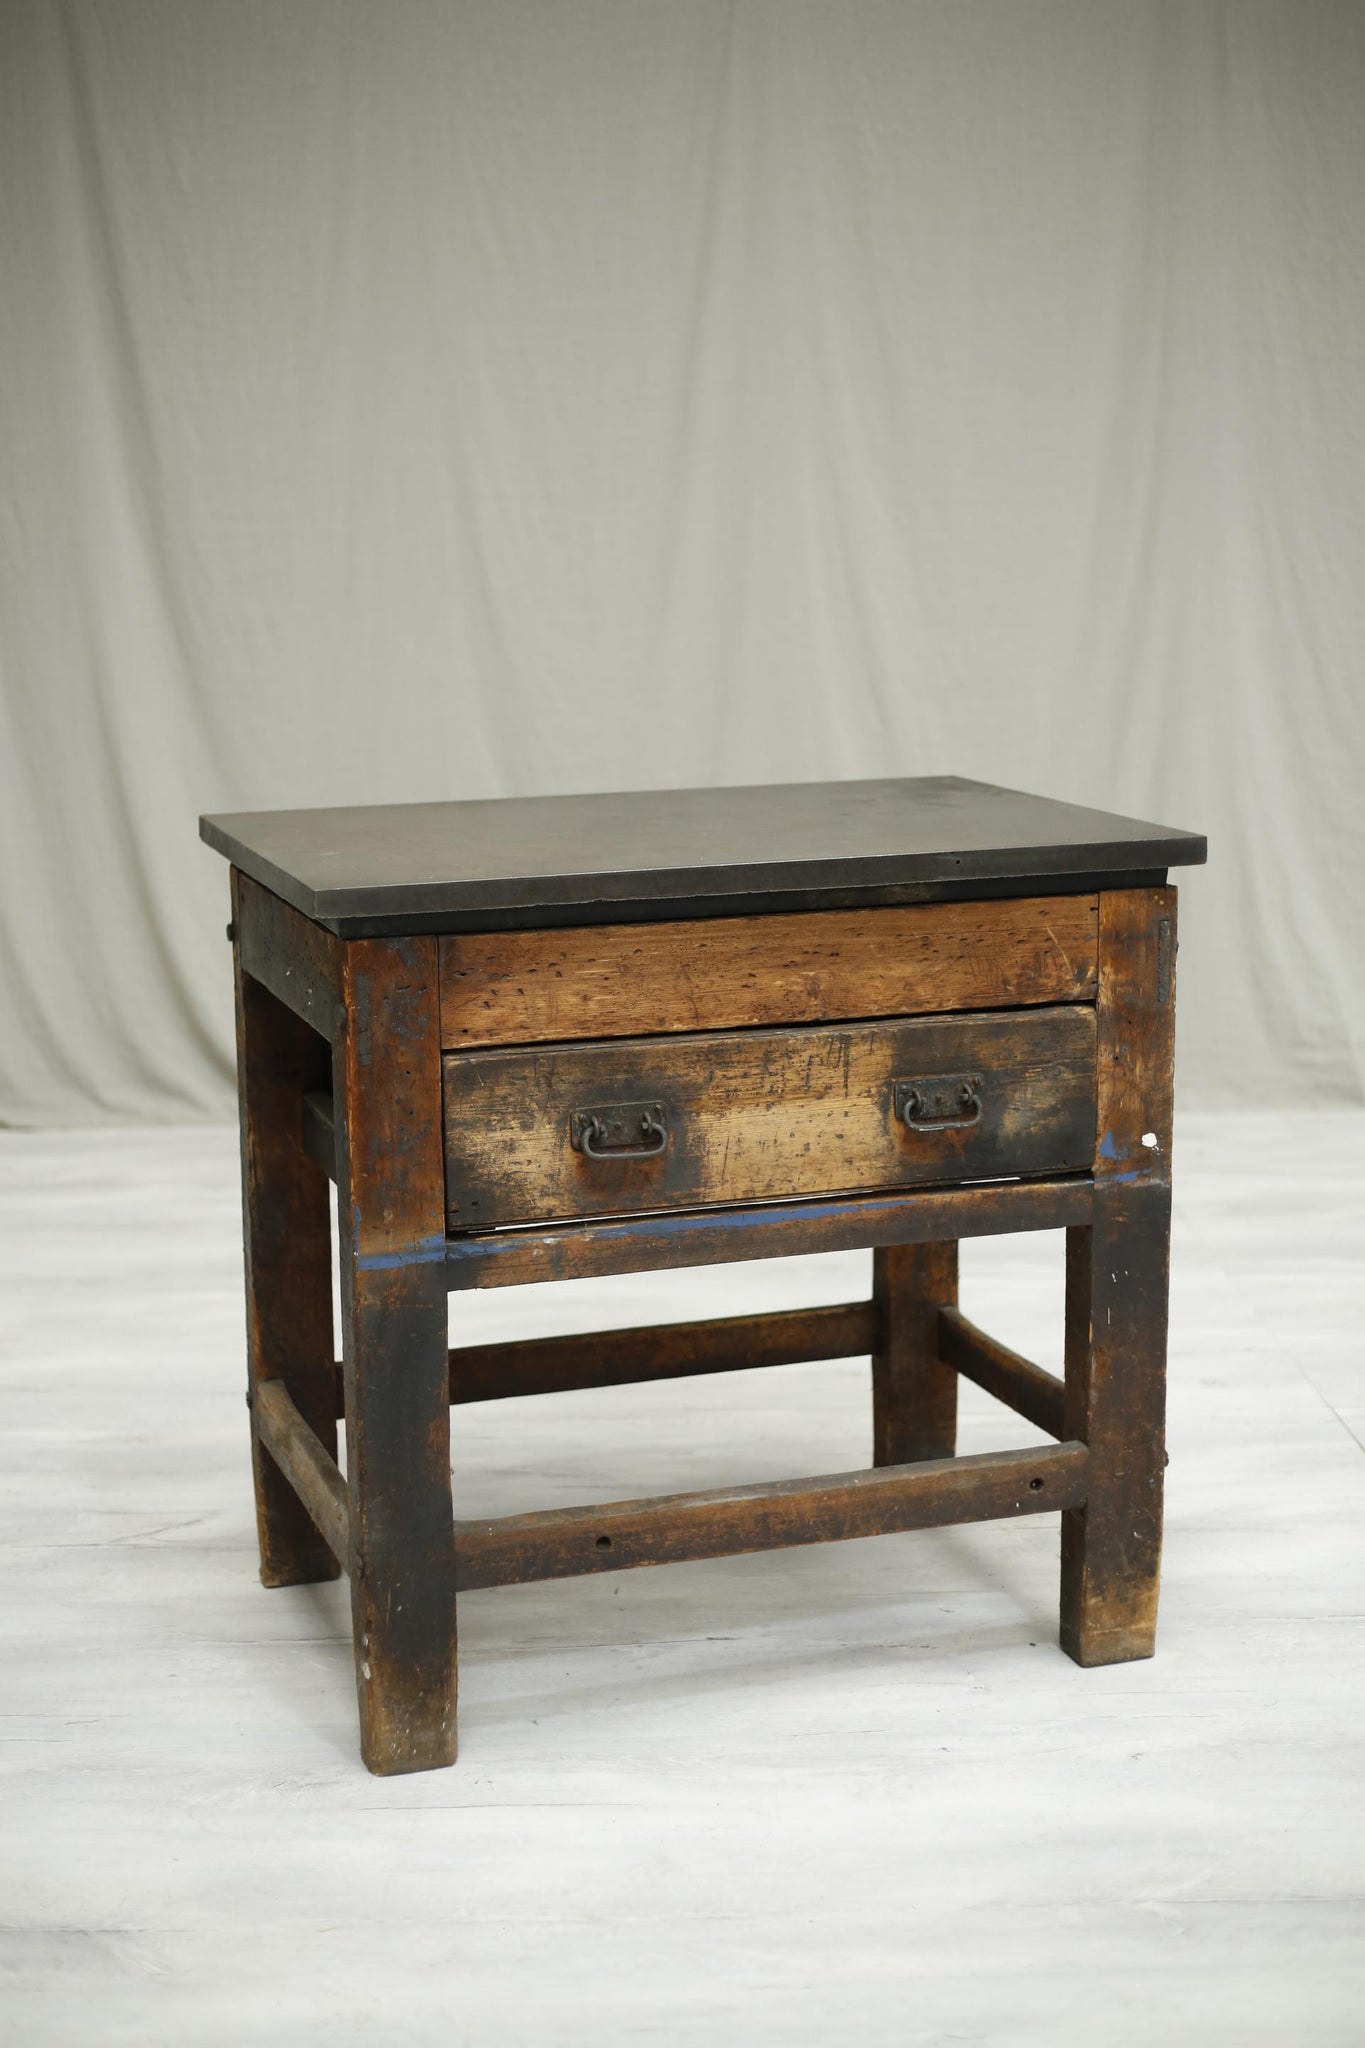 Early 20th century antique industrial printing table - TallBoy Interiors